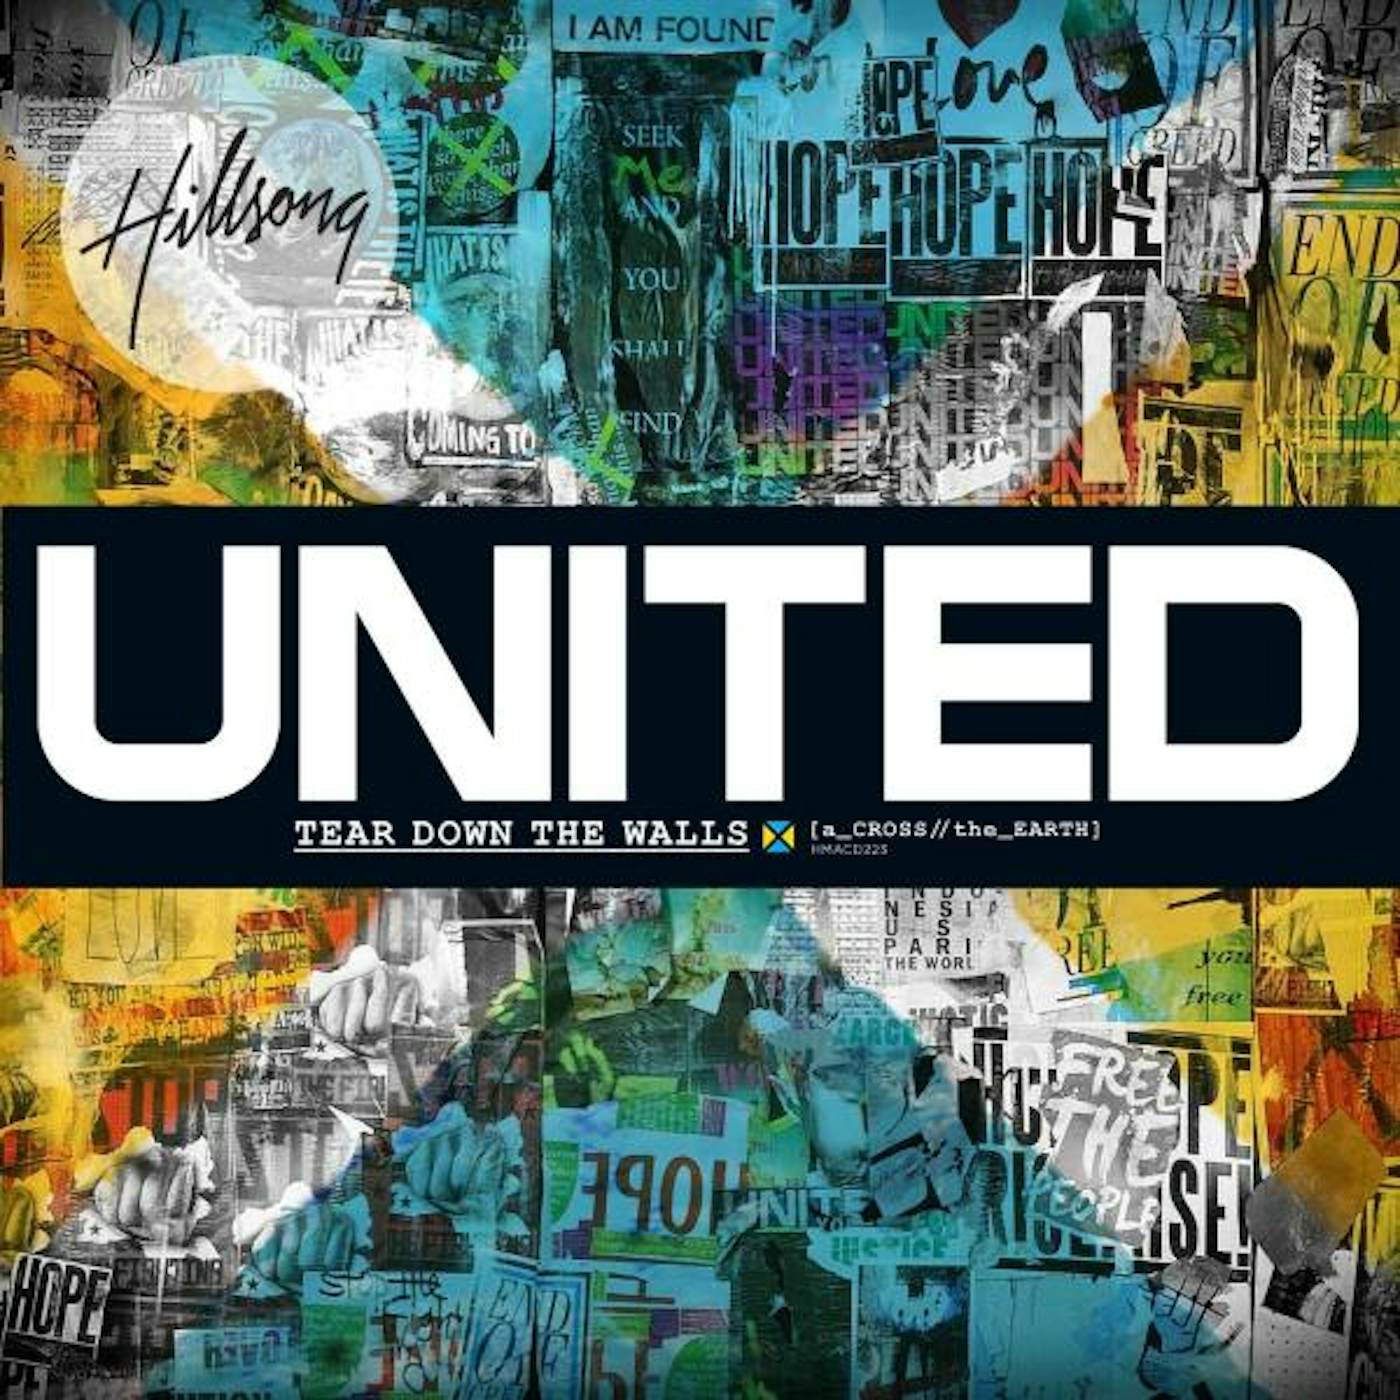 Hillsong UNITED CROSS THE EARTH: TEAR DOWN THE WALLS CD